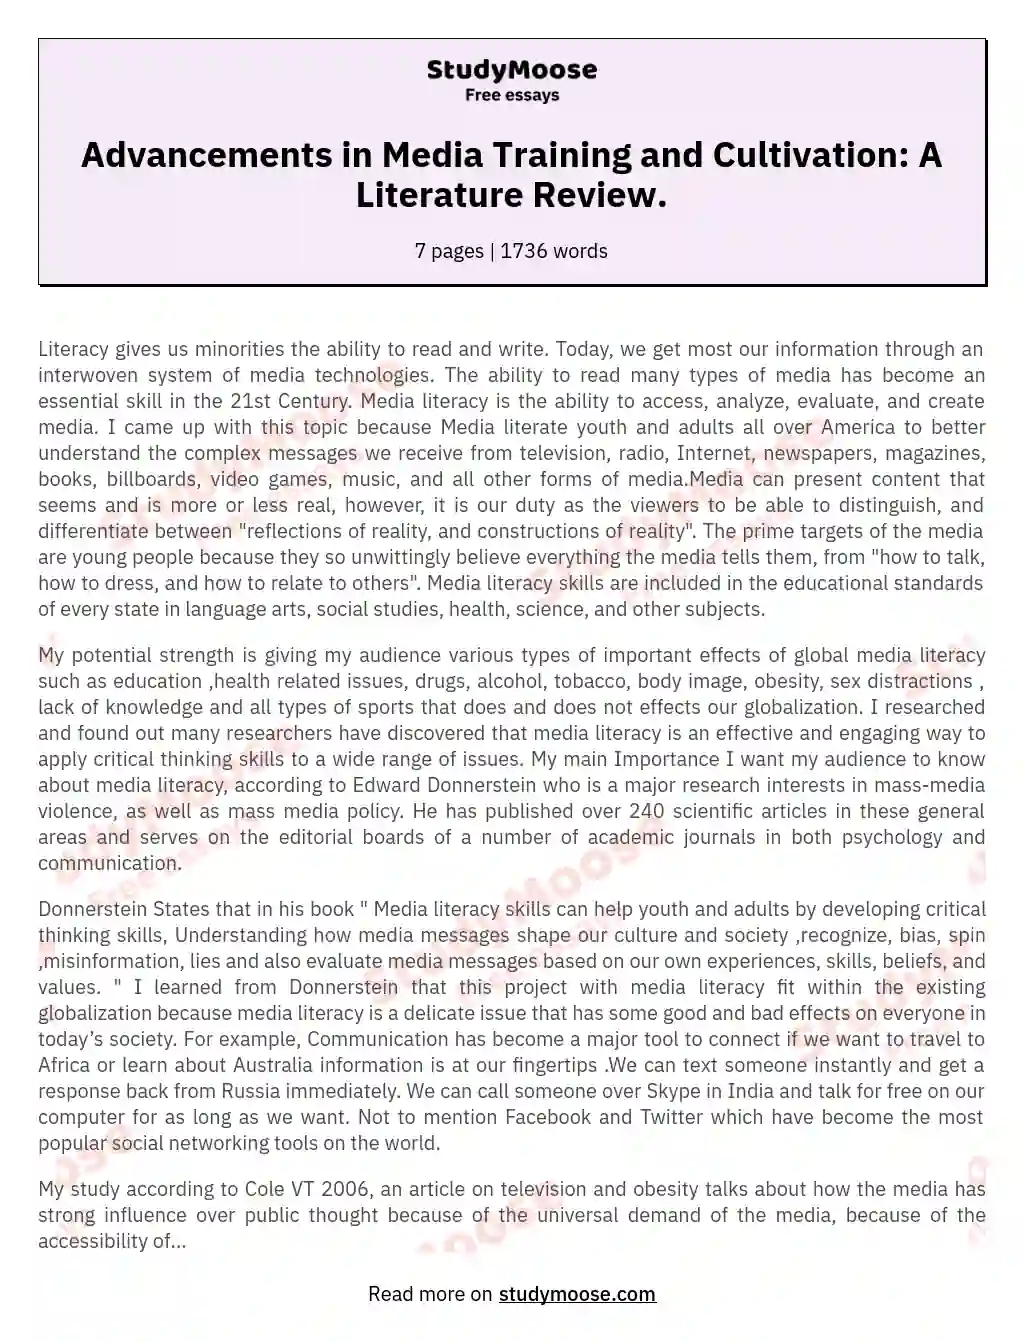 Advancements in Media Training and Cultivation: A Literature Review. essay